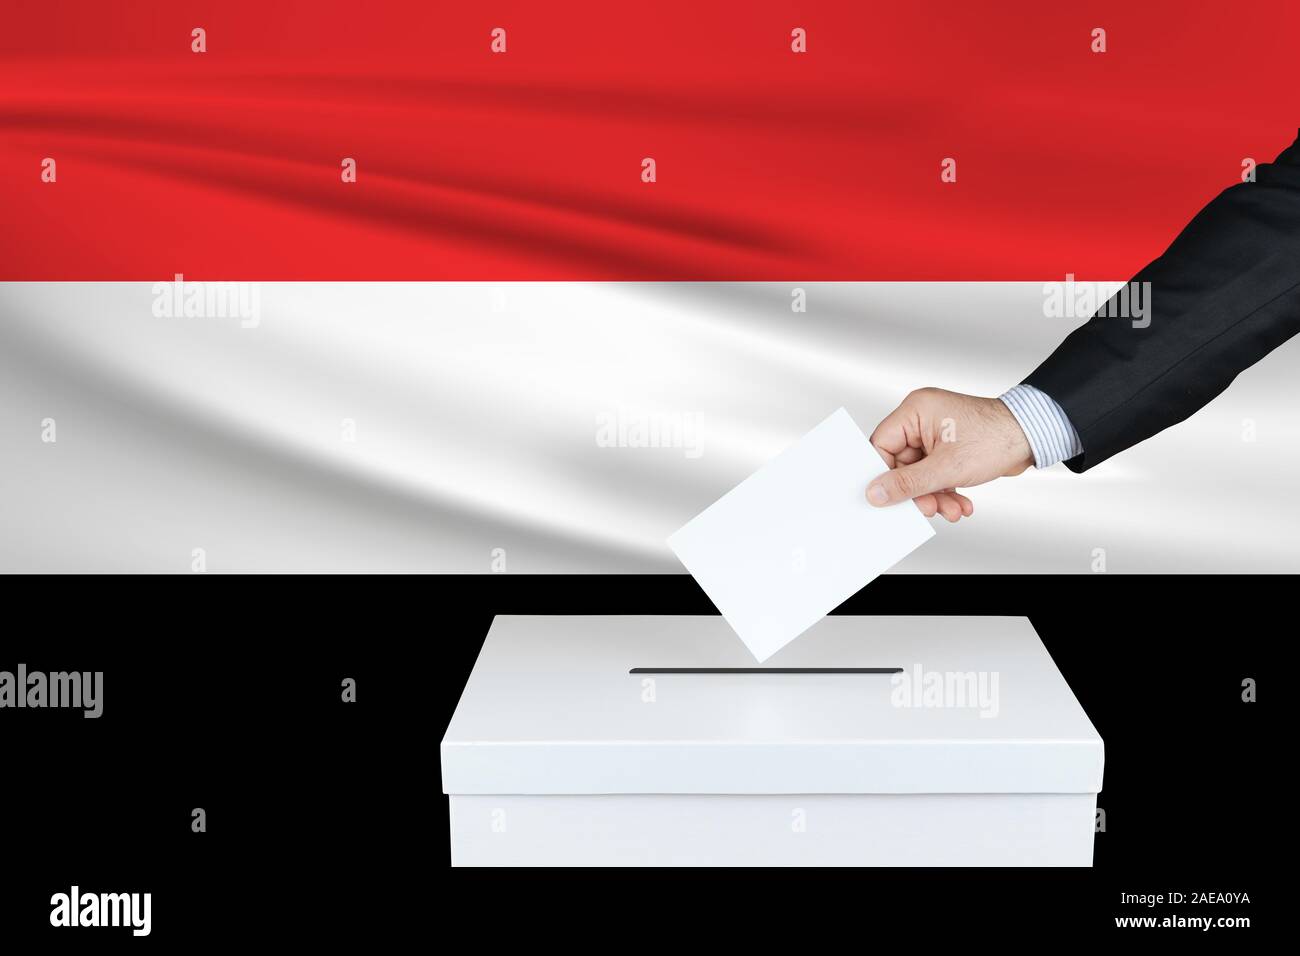 Election in Yemen. The hand of man putting his vote in the ballot box. Waved Yemen flag on background. Stock Photo